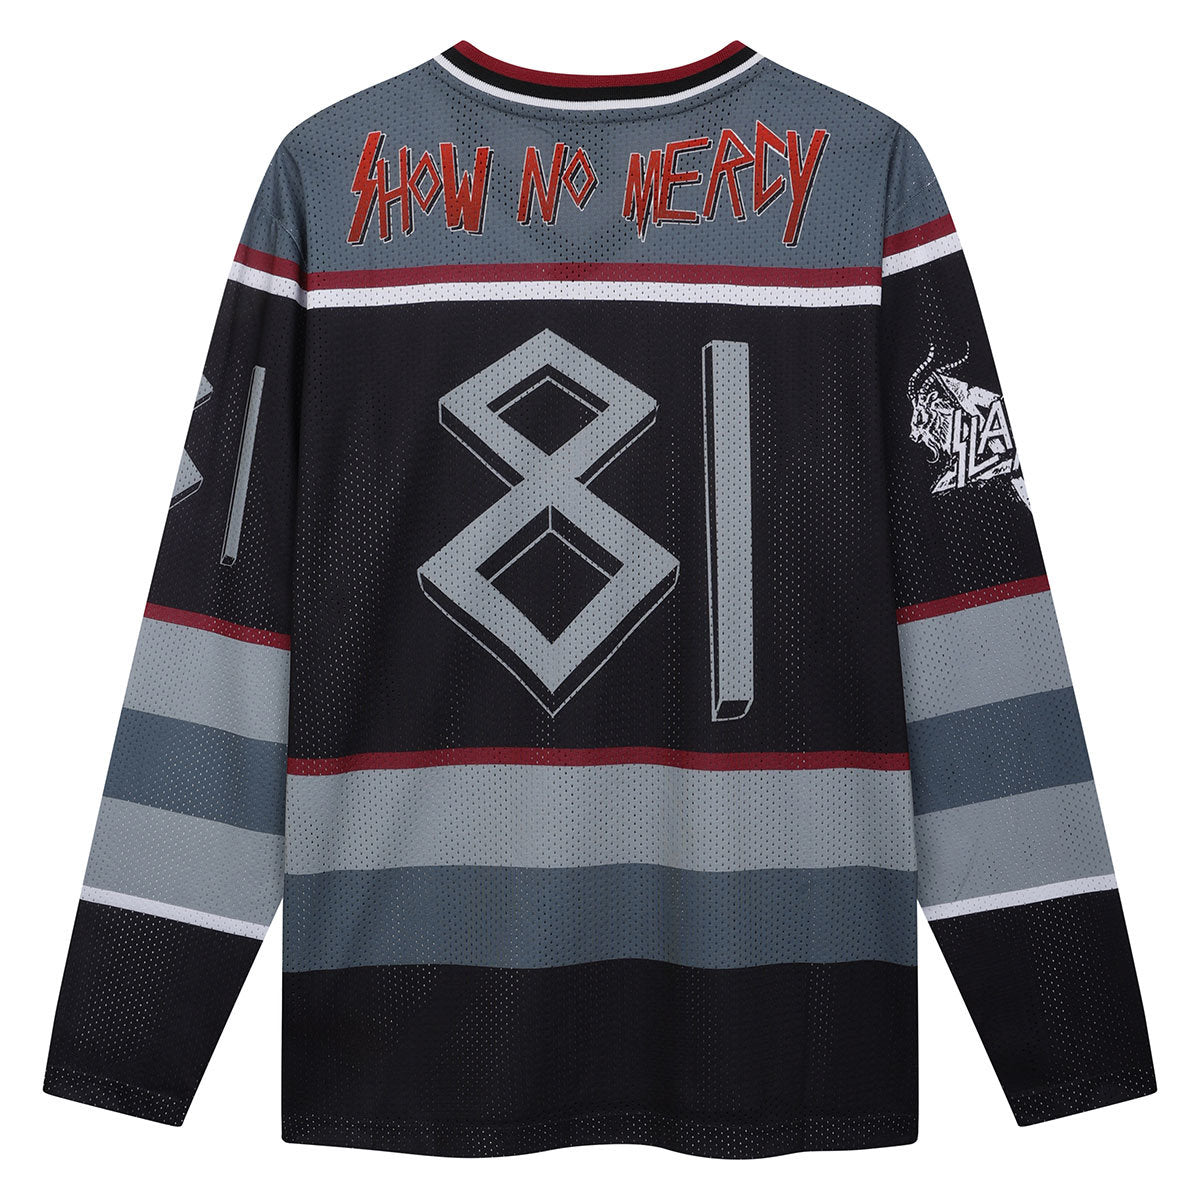 Amplified Slayer Hockey Jersey - Official Licensed Product